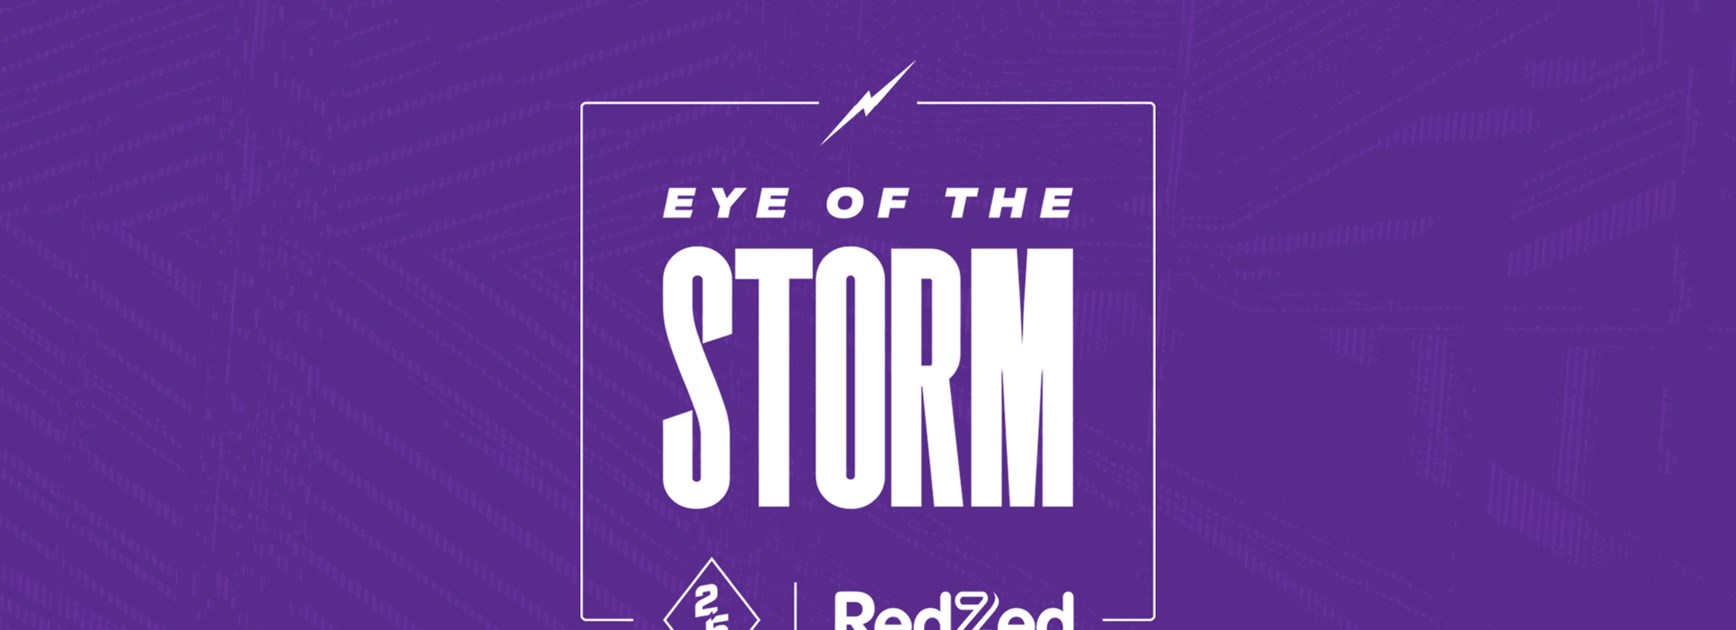 Eye of the Storm: Episode 1 out now